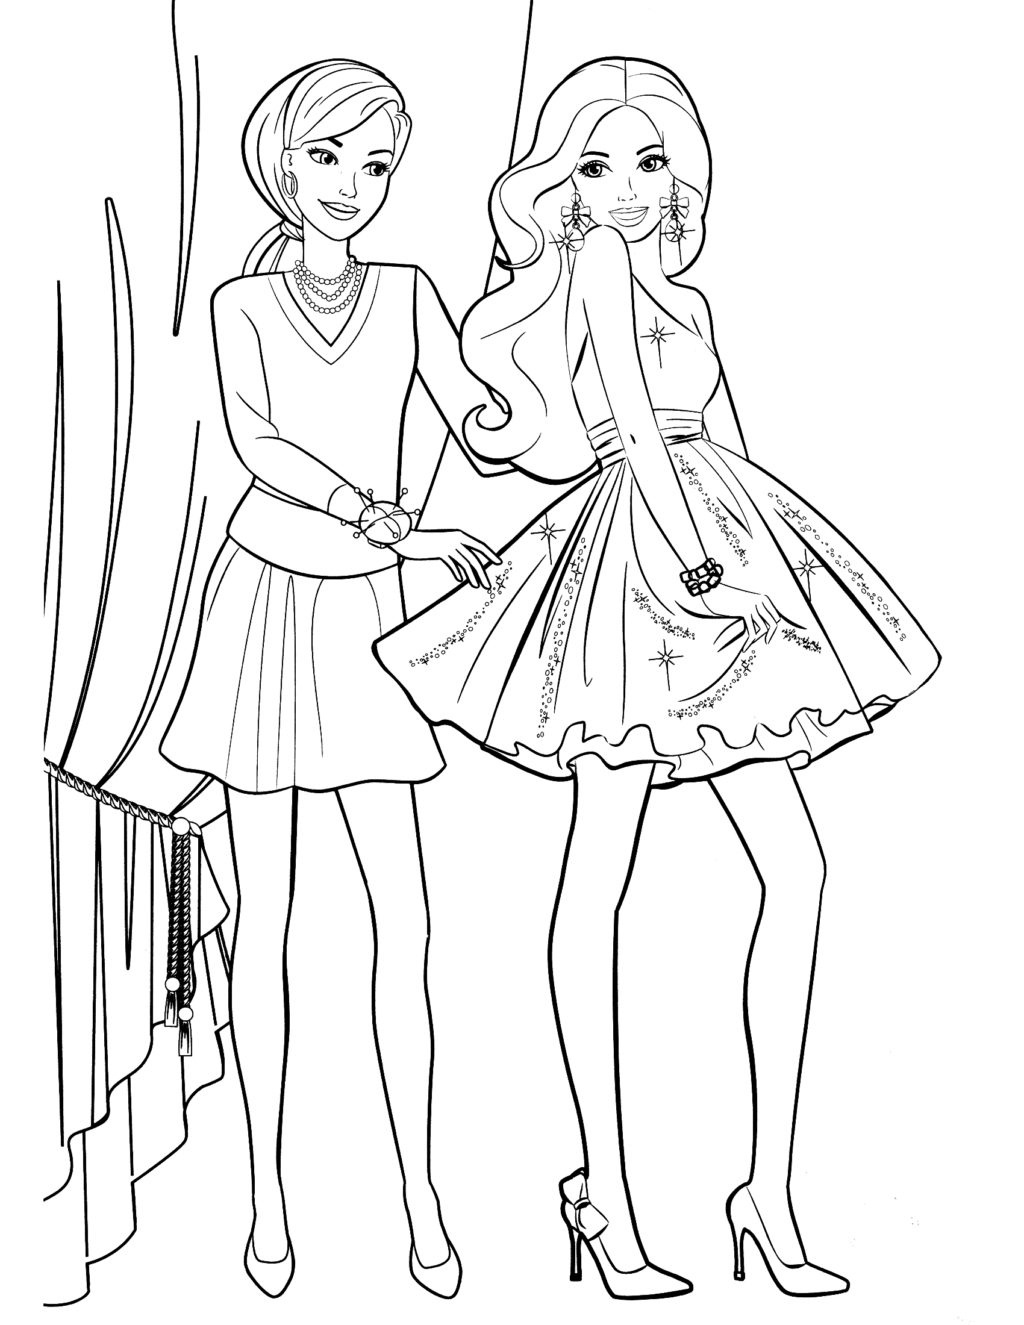 Coloring Book World ~ Free Coloring Pages Pdf Princess Barbie To - Free Printable Barbie Coloring Pages